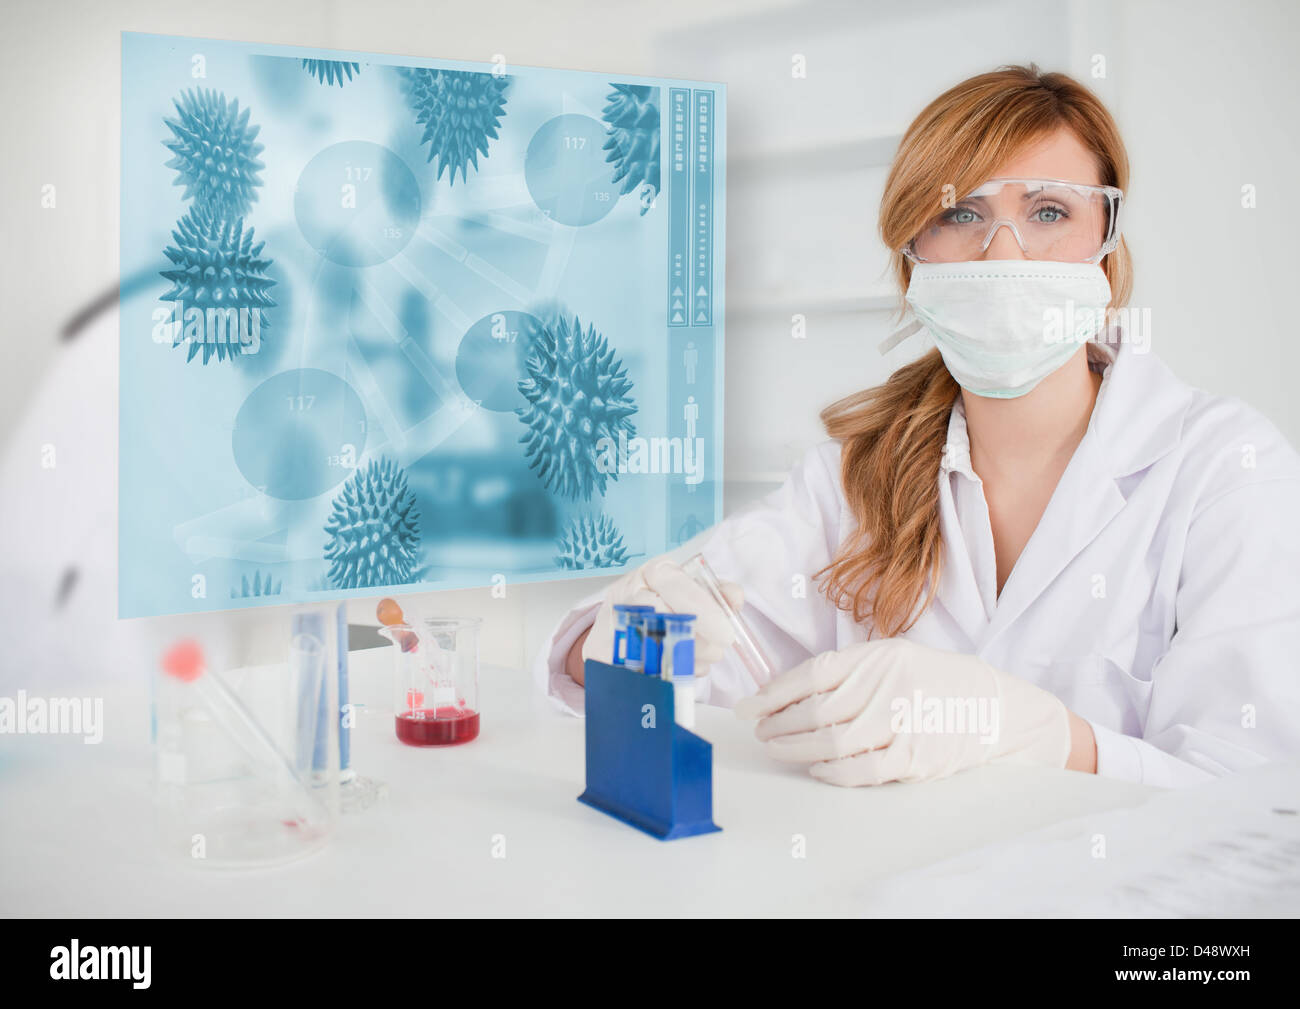 Scientist working in the lab with futuristic interface Stock Photo